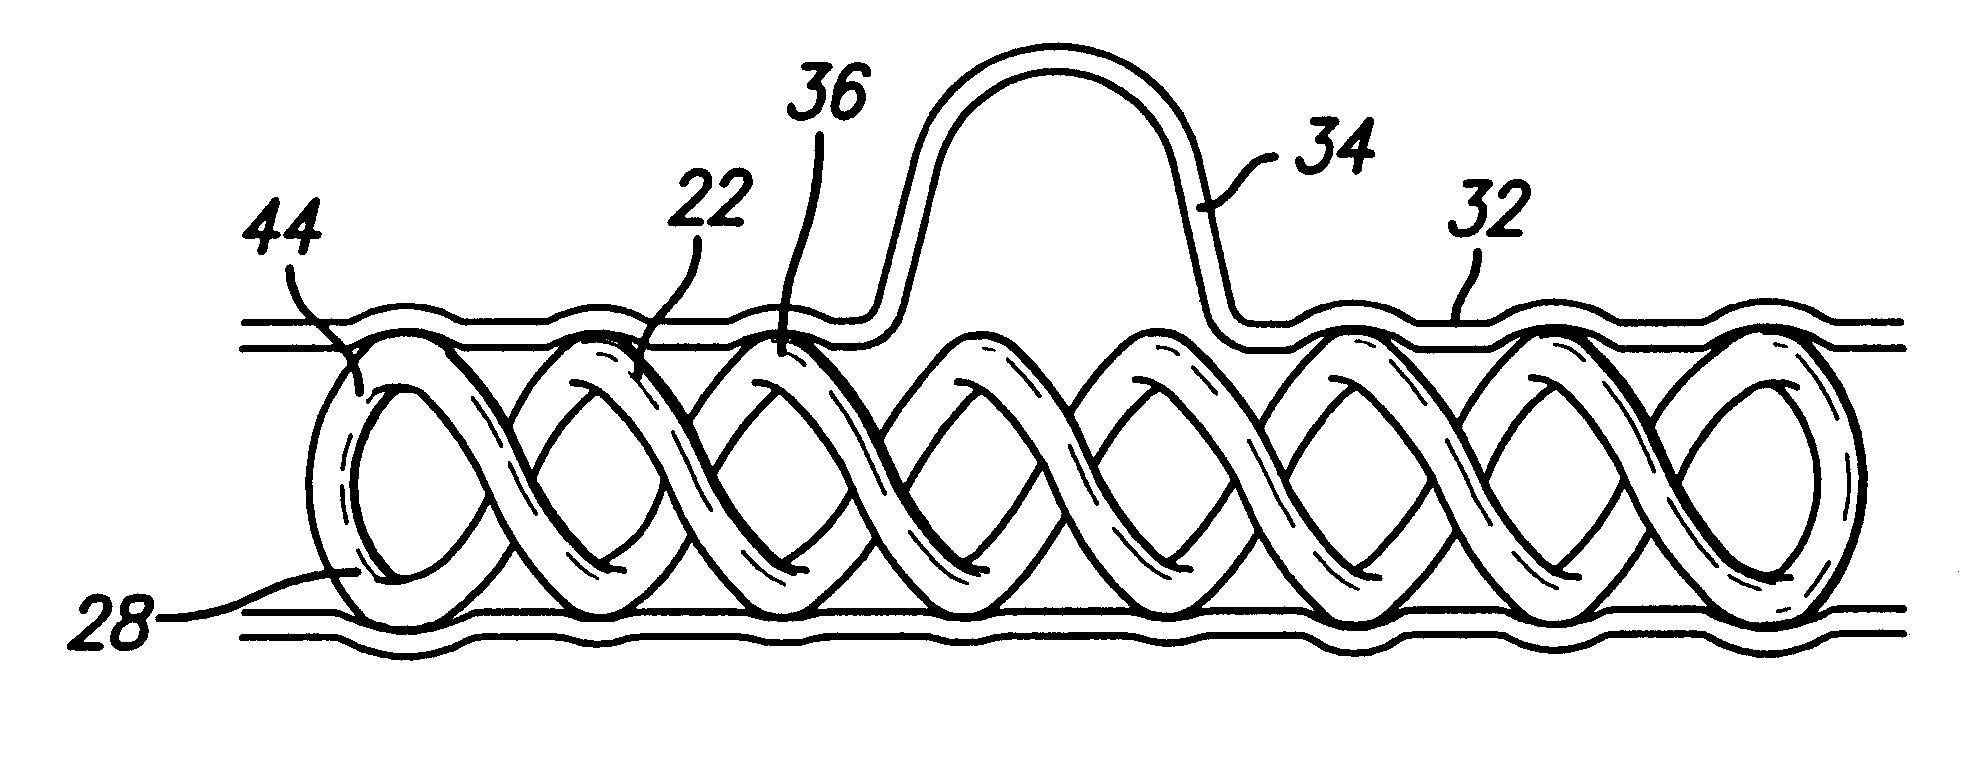 Insitu formable and self-forming intravascular flow modifier (IFM) and IFM assembly for deployment of same